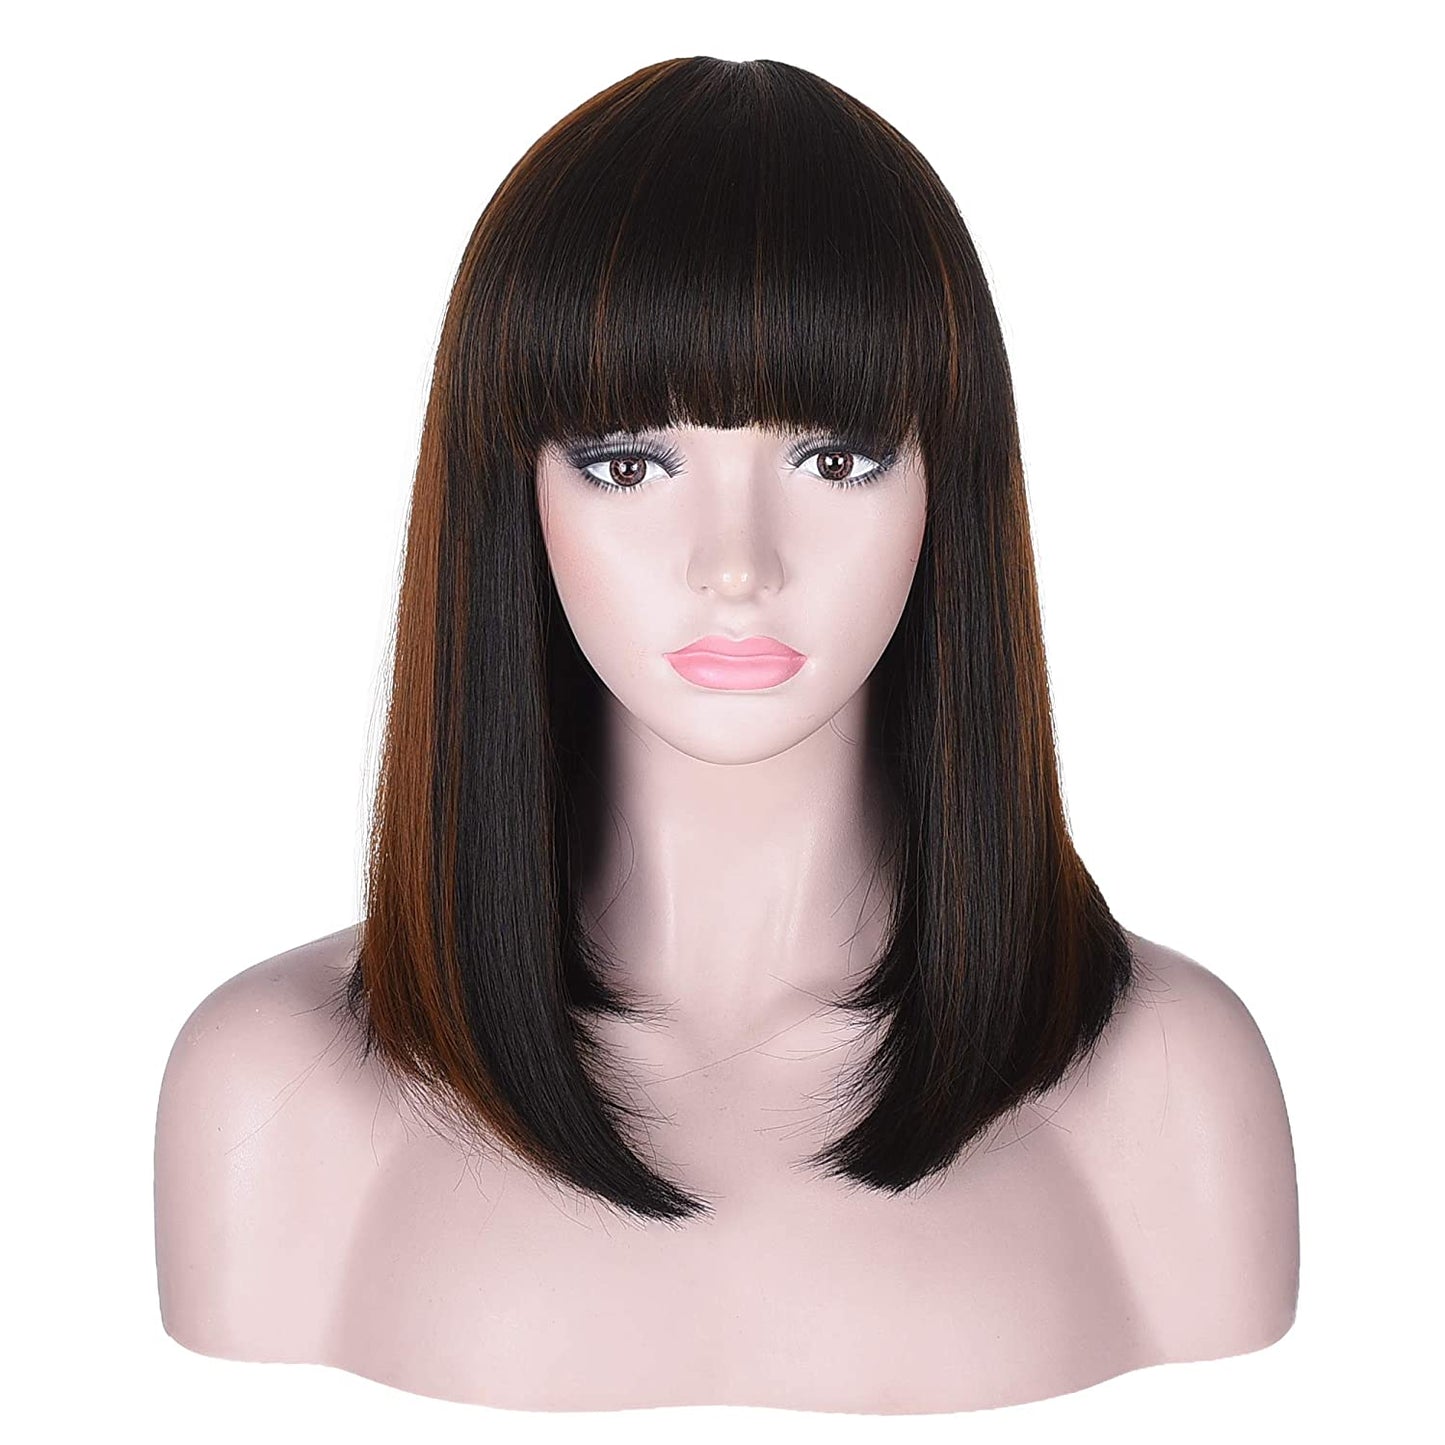 Lush Locks 15 Inch Short Straight Black with Brown Highlights Bob Wig with Bangs